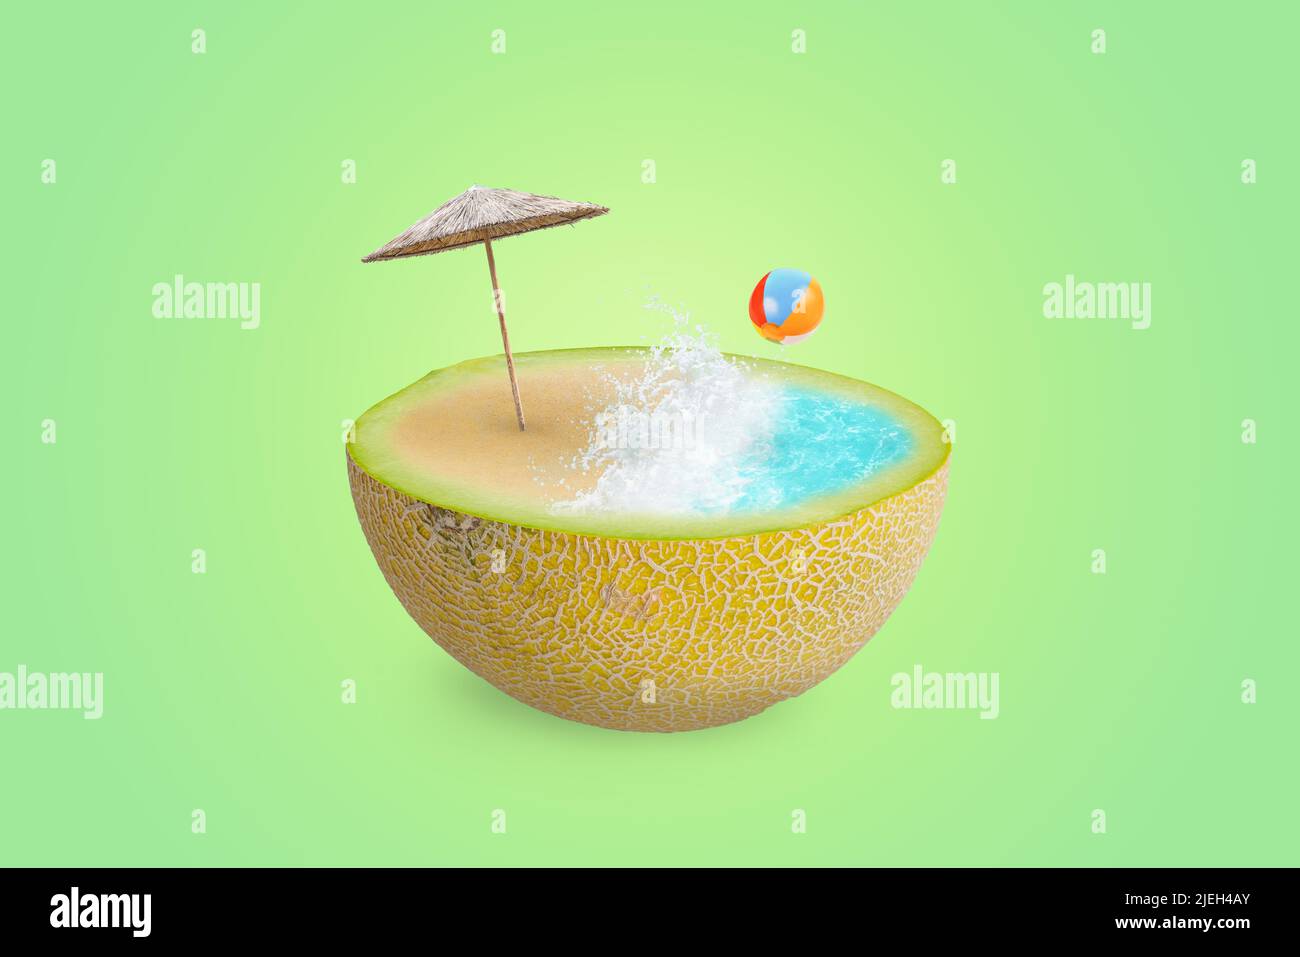 Beach with sea waves, parasol and ball on half a melon. The concept of summer refreshment with fruit and vitamins. Green background Stock Photo